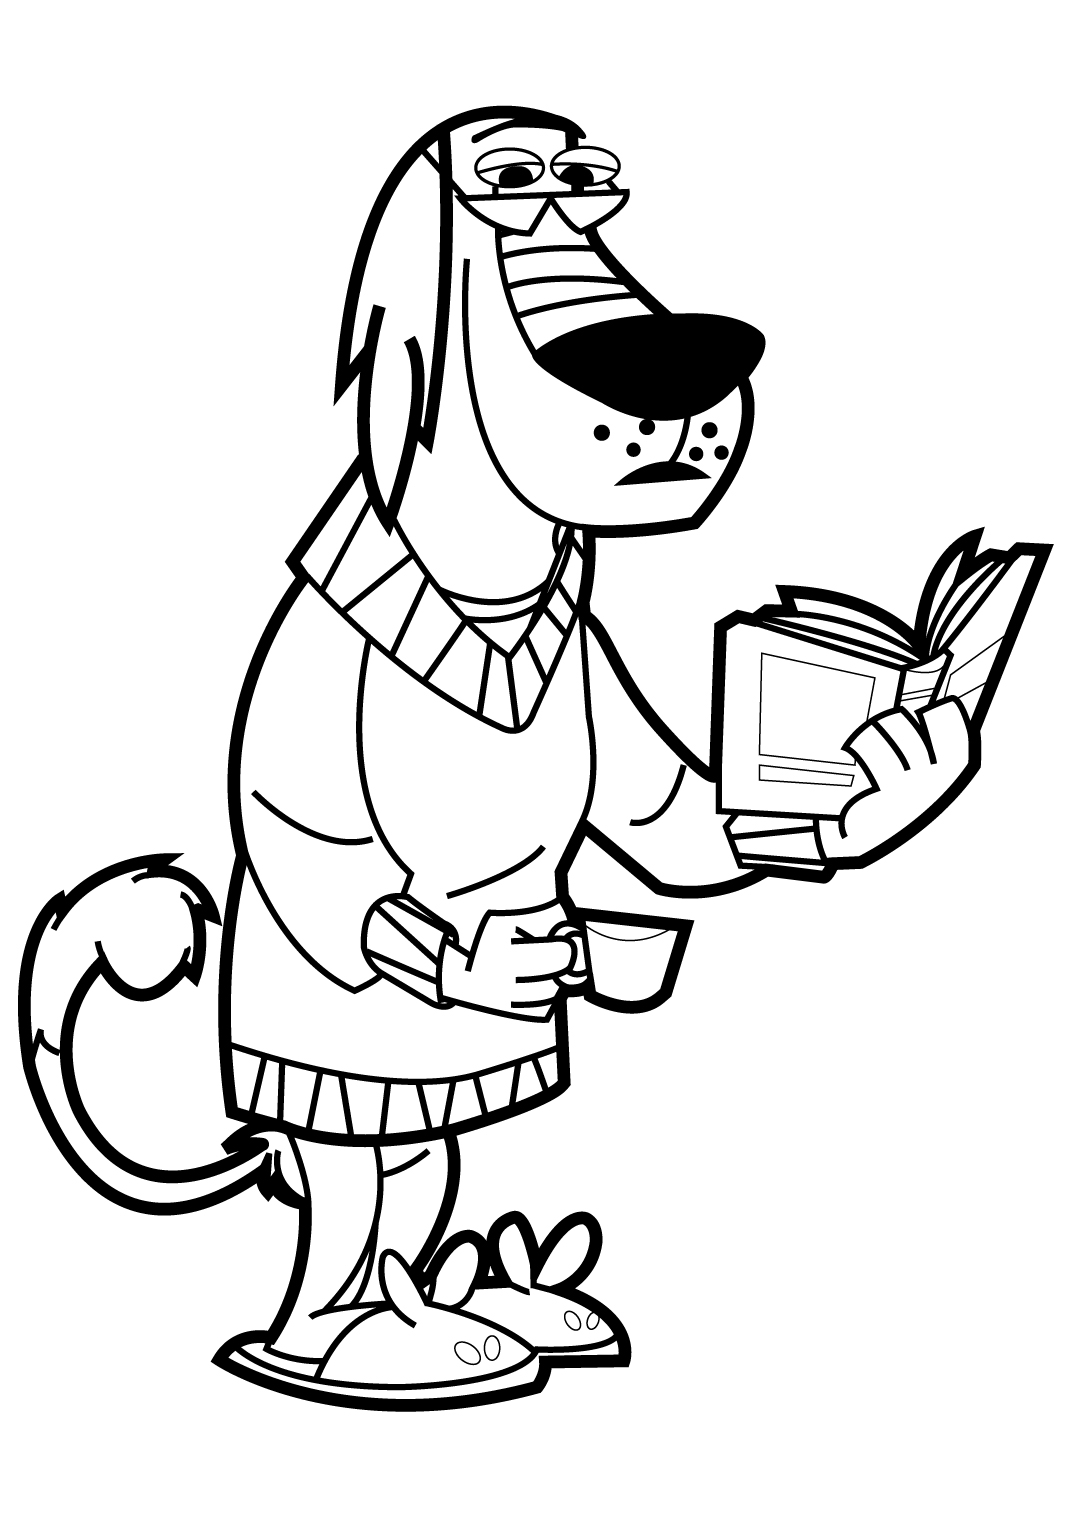  Free Johnny Test coloring pages | letscoloringpages.com | Dukey reading